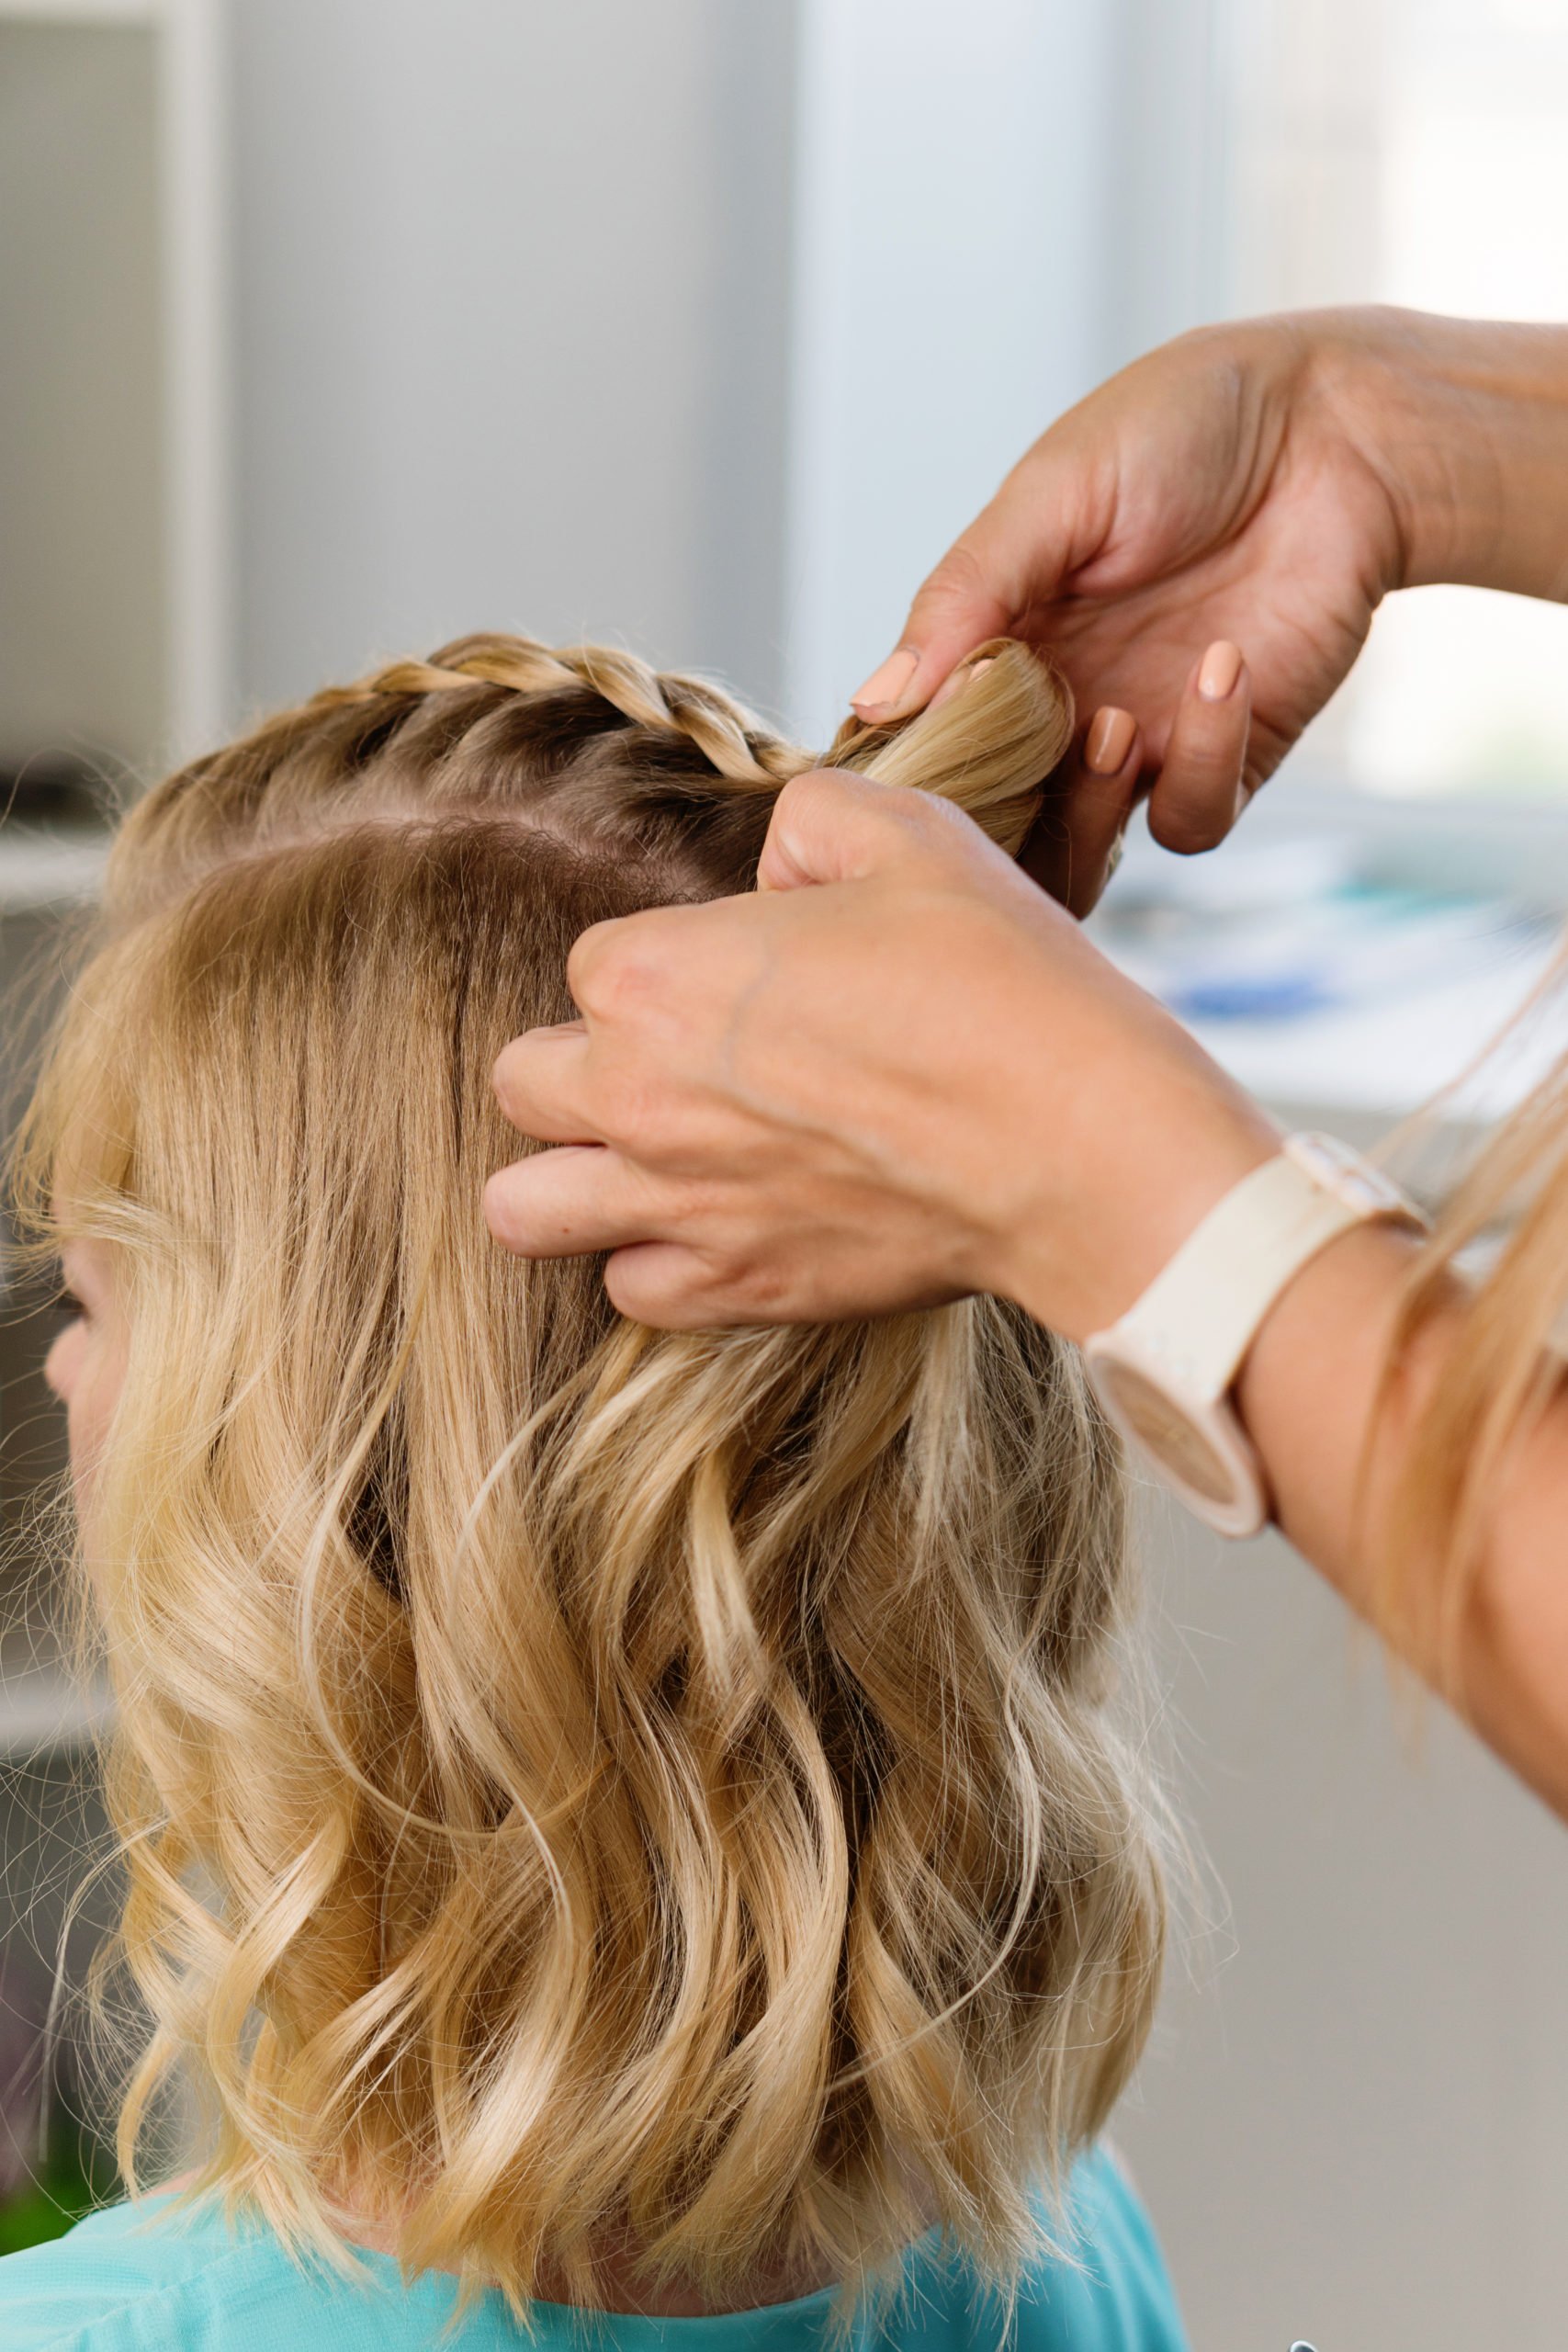 How Long Do Hand Tied Extensions Last? Is It Good or Not?